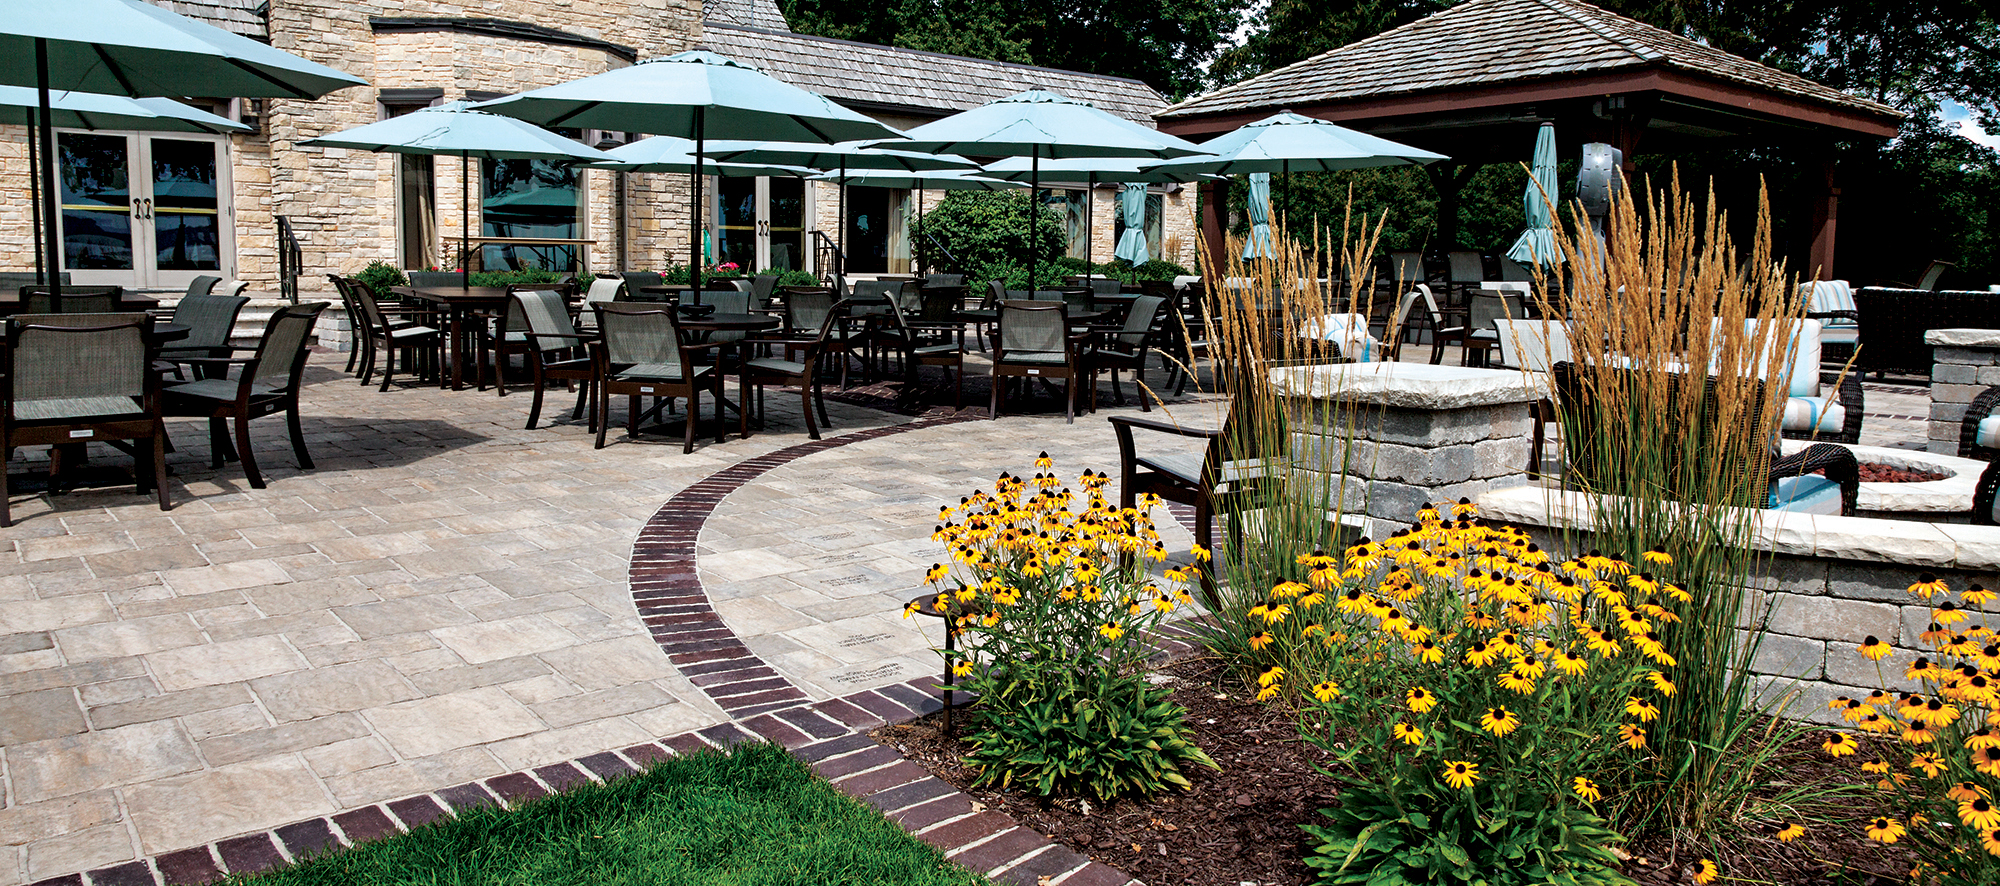 This entrance has patio furniture on Thornbury pavers with lines of contrasting pavers extending to a garden in front of an Old Quarry wall.